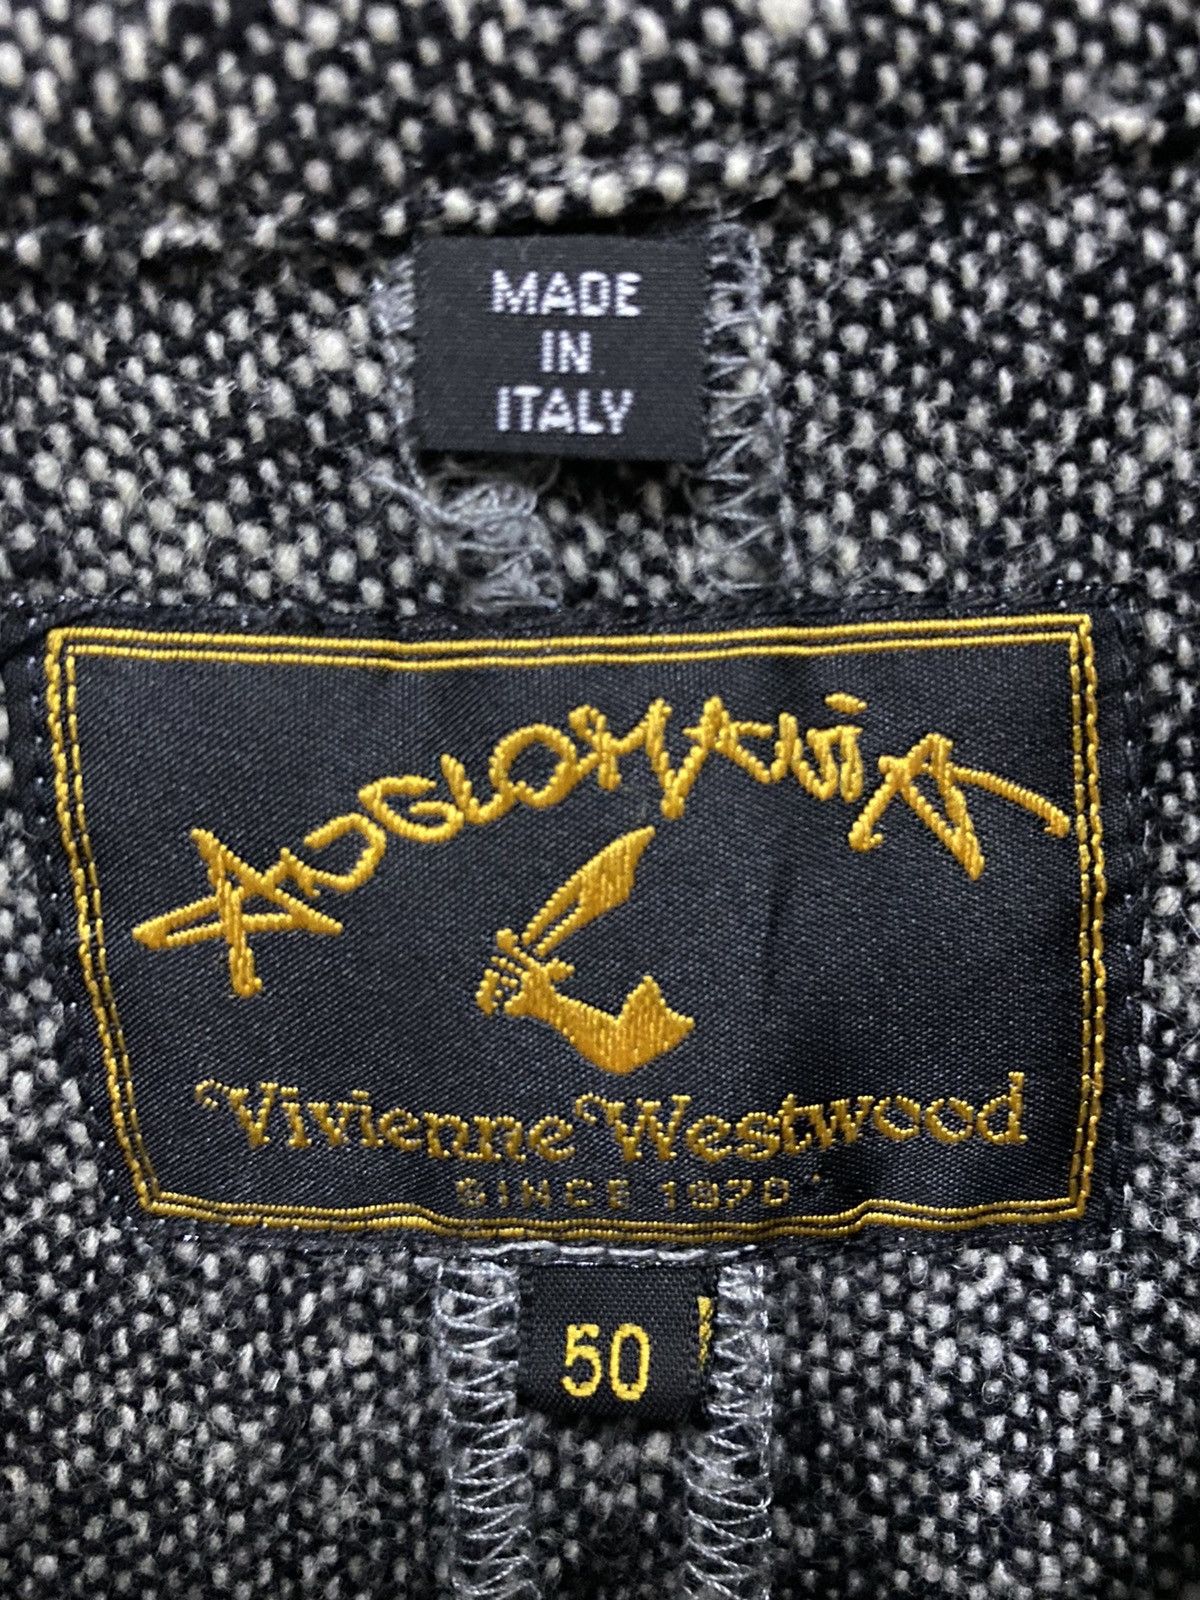 Vivienne Westwood Anglomania Wool Long Jacket Made in Italy - 11